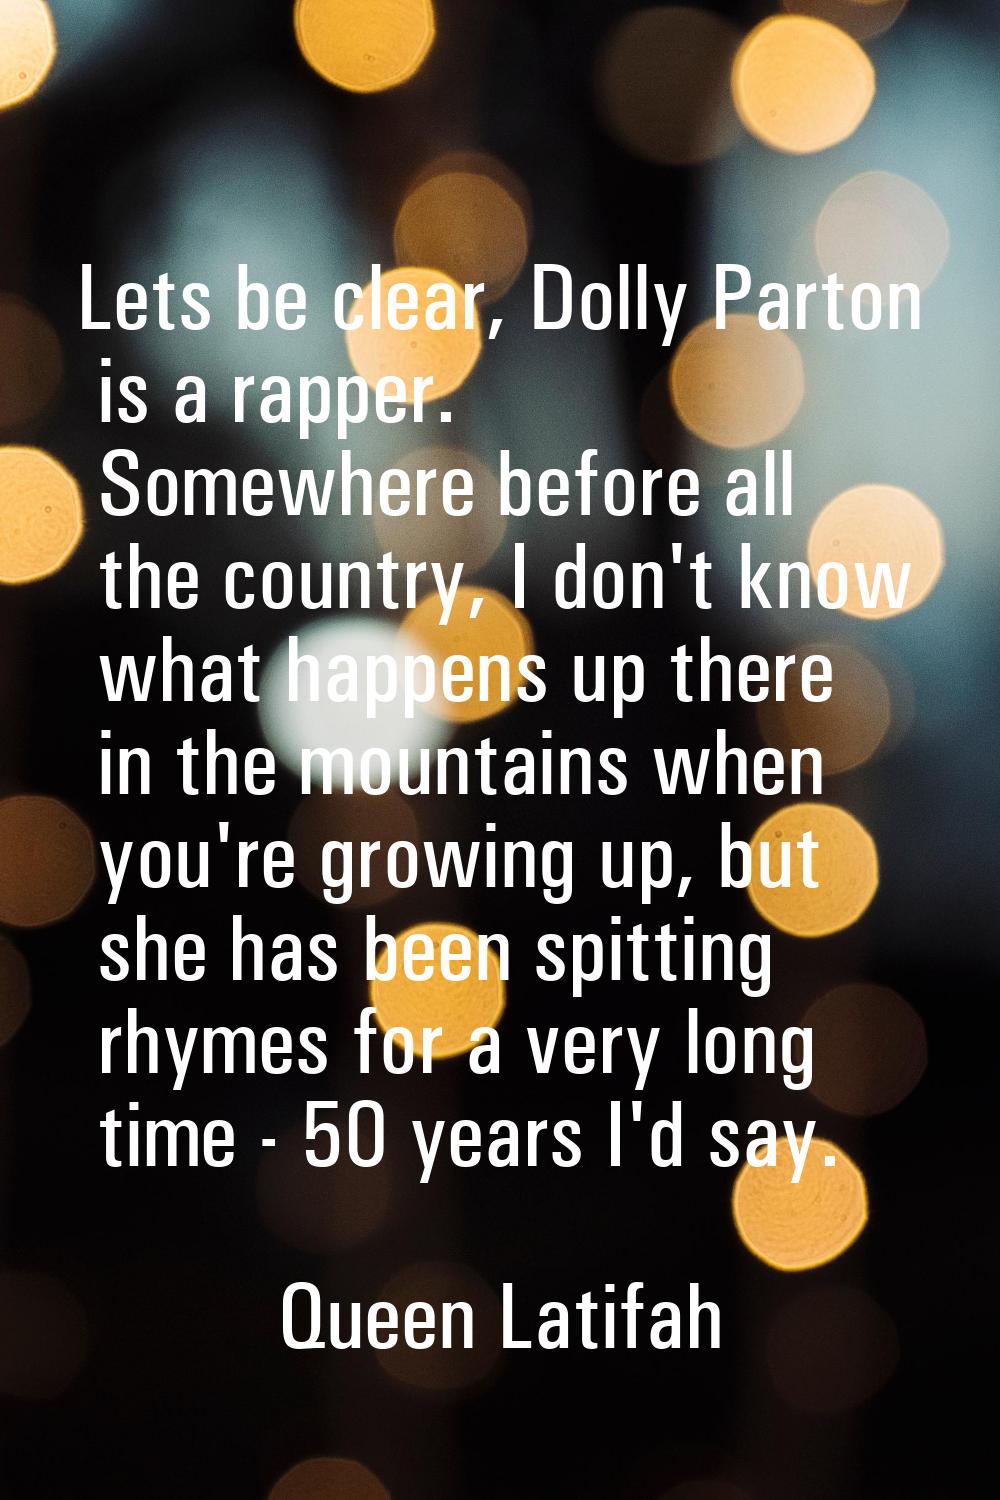 Lets be clear, Dolly Parton is a rapper. Somewhere before all the country, I don't know what happen